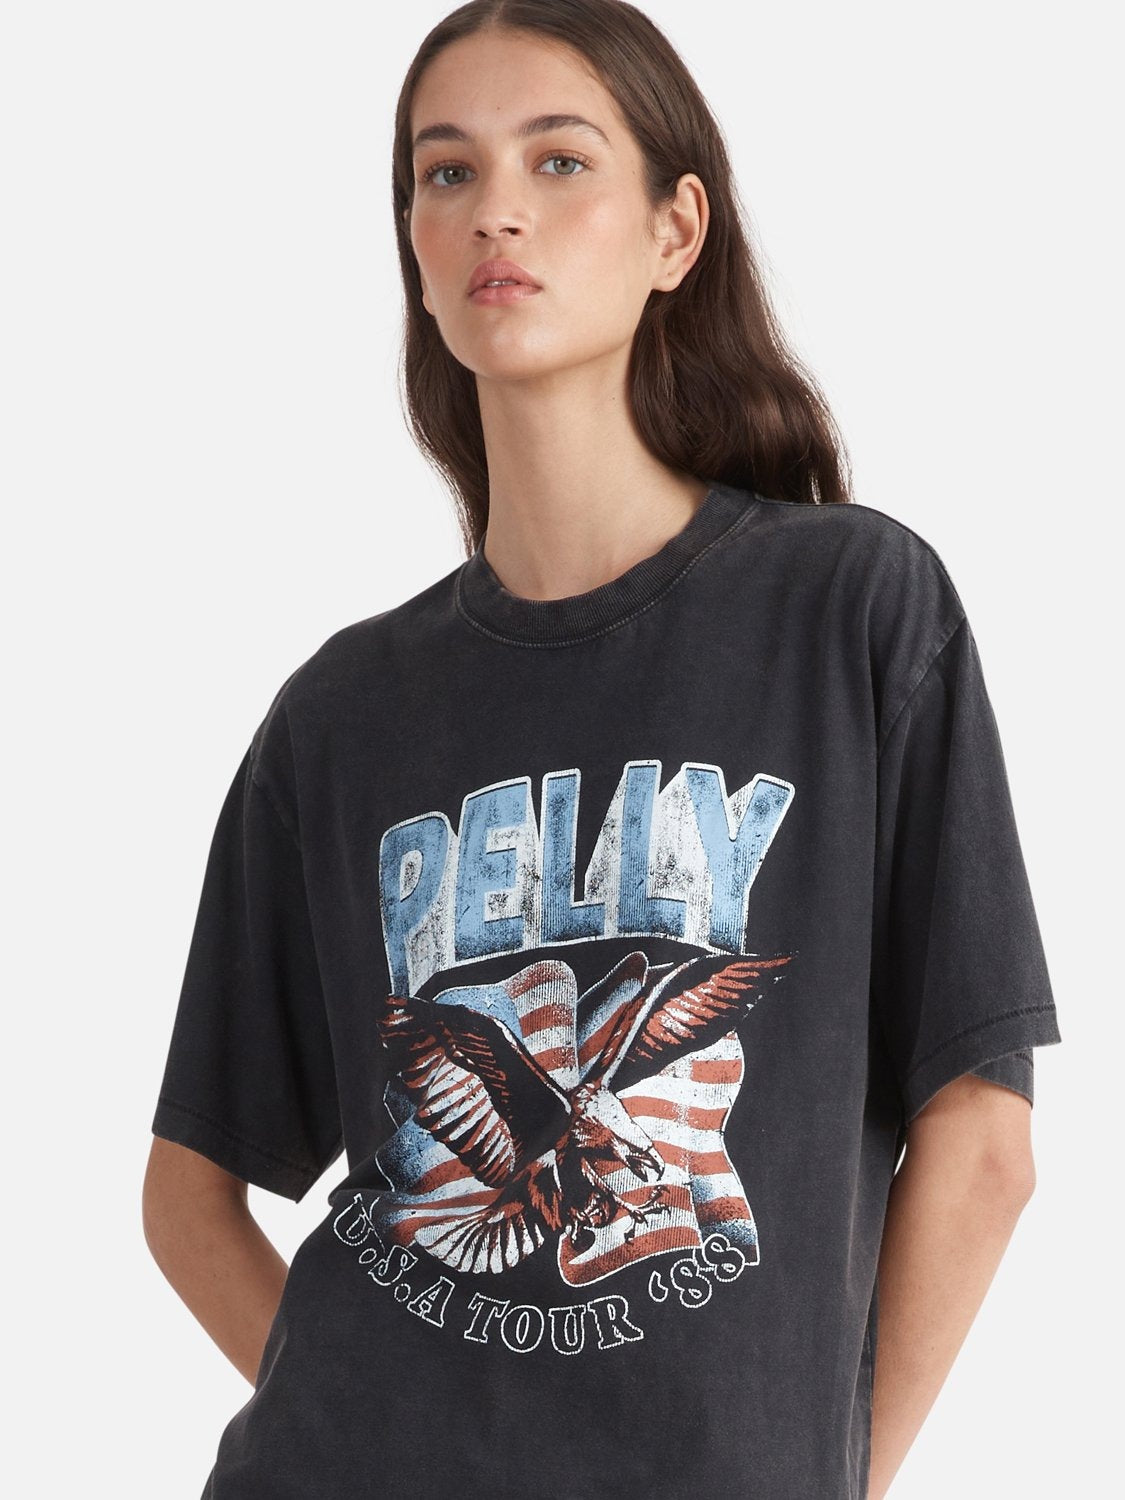 Ena Pelly | Pelly Tour Relaxed Tee